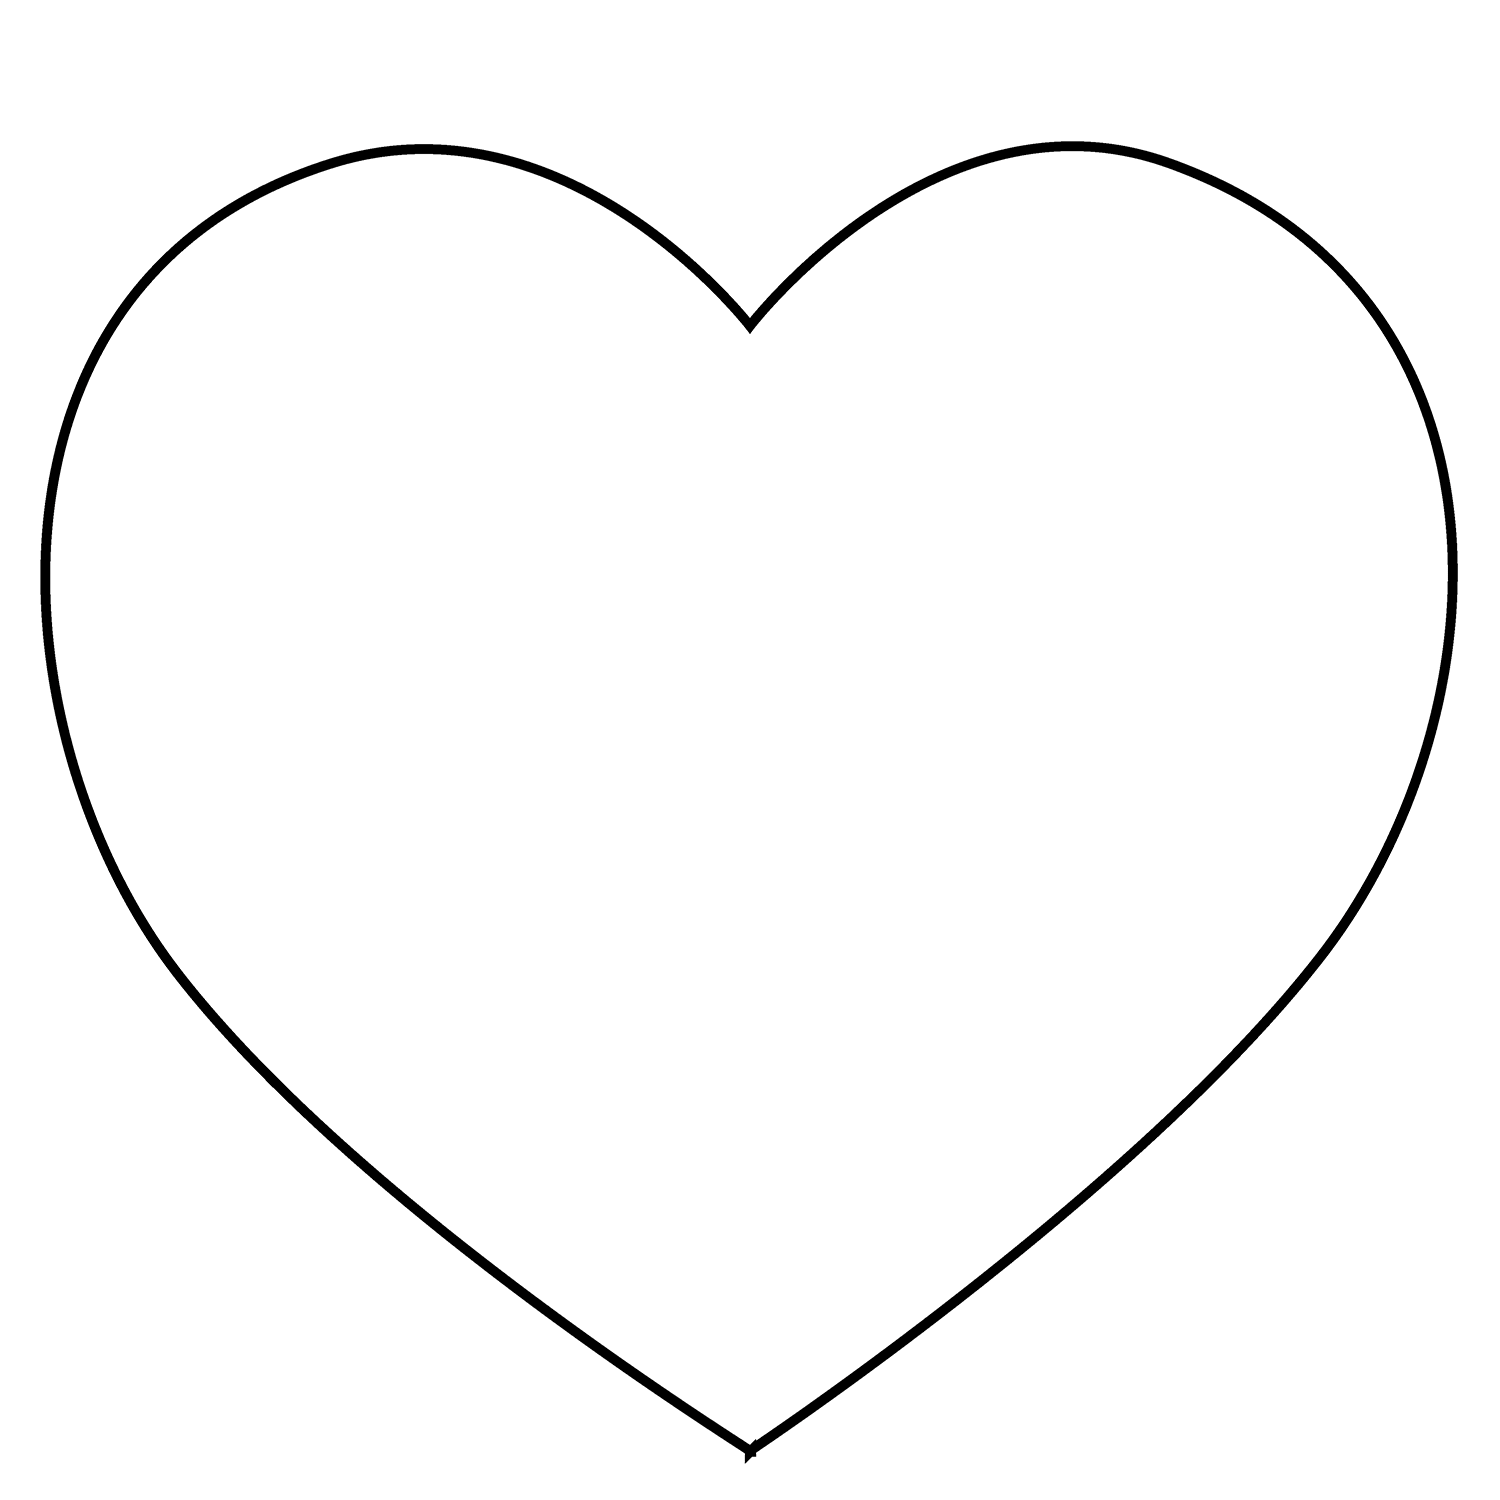 Heart Suit Emoji coloring page - ColouringPages